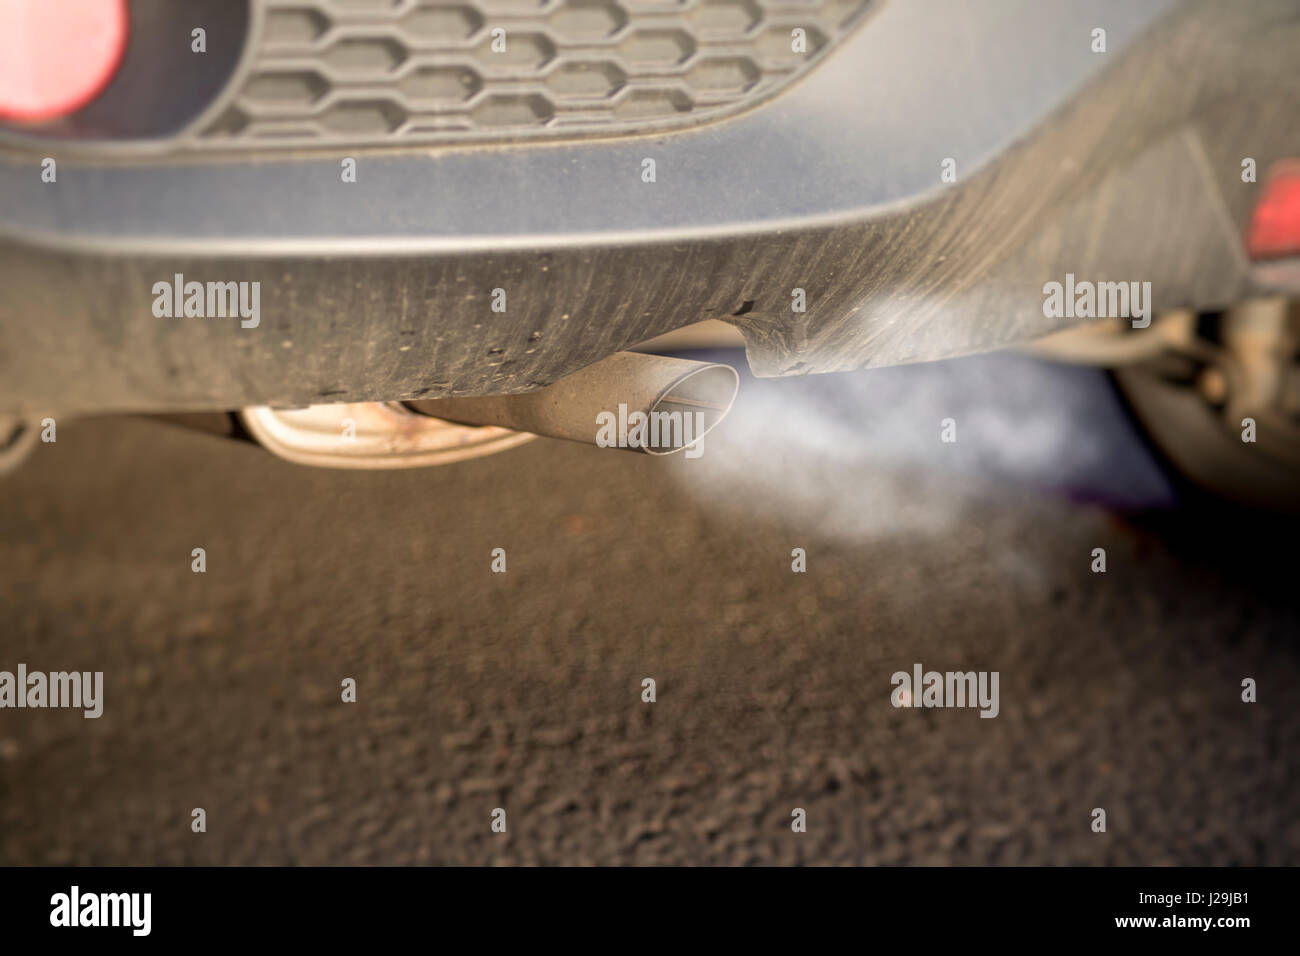 Car exhaust fumes causing health problems and environmental concerns Stock Photo